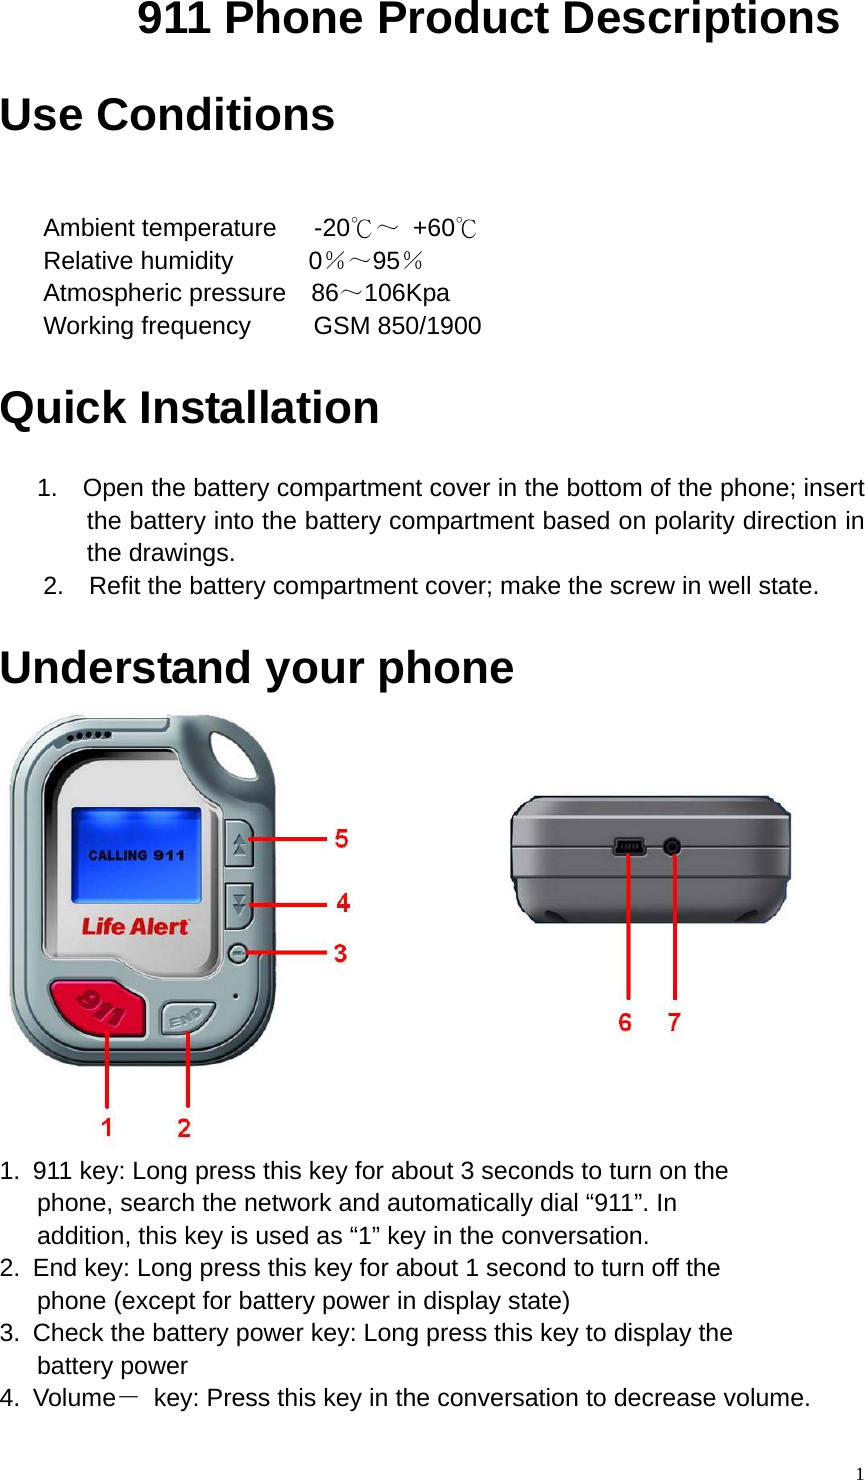       911 Phone Product Descriptions   Use Conditions    Ambient temperature   -20℃～ +60℃   Relative humidity      0％～95％   Atmospheric pressure  86～106Kpa    Working frequency     GSM 850/1900  Quick Installation       1.  Open the battery compartment cover in the bottom of the phone; insert the battery into the battery compartment based on polarity direction in the drawings.     2.    Refit the battery compartment cover; make the screw in well state.  Understand your phone    1.  911 key: Long press this key for about 3 seconds to turn on the       phone, search the network and automatically dial “911”. In         addition, this key is used as “1” key in the conversation. 2.  End key: Long press this key for about 1 second to turn off the    phone (except for battery power in display state) 3.  Check the battery power key: Long press this key to display the    battery power 4. Volume－  key: Press this key in the conversation to decrease volume.   1